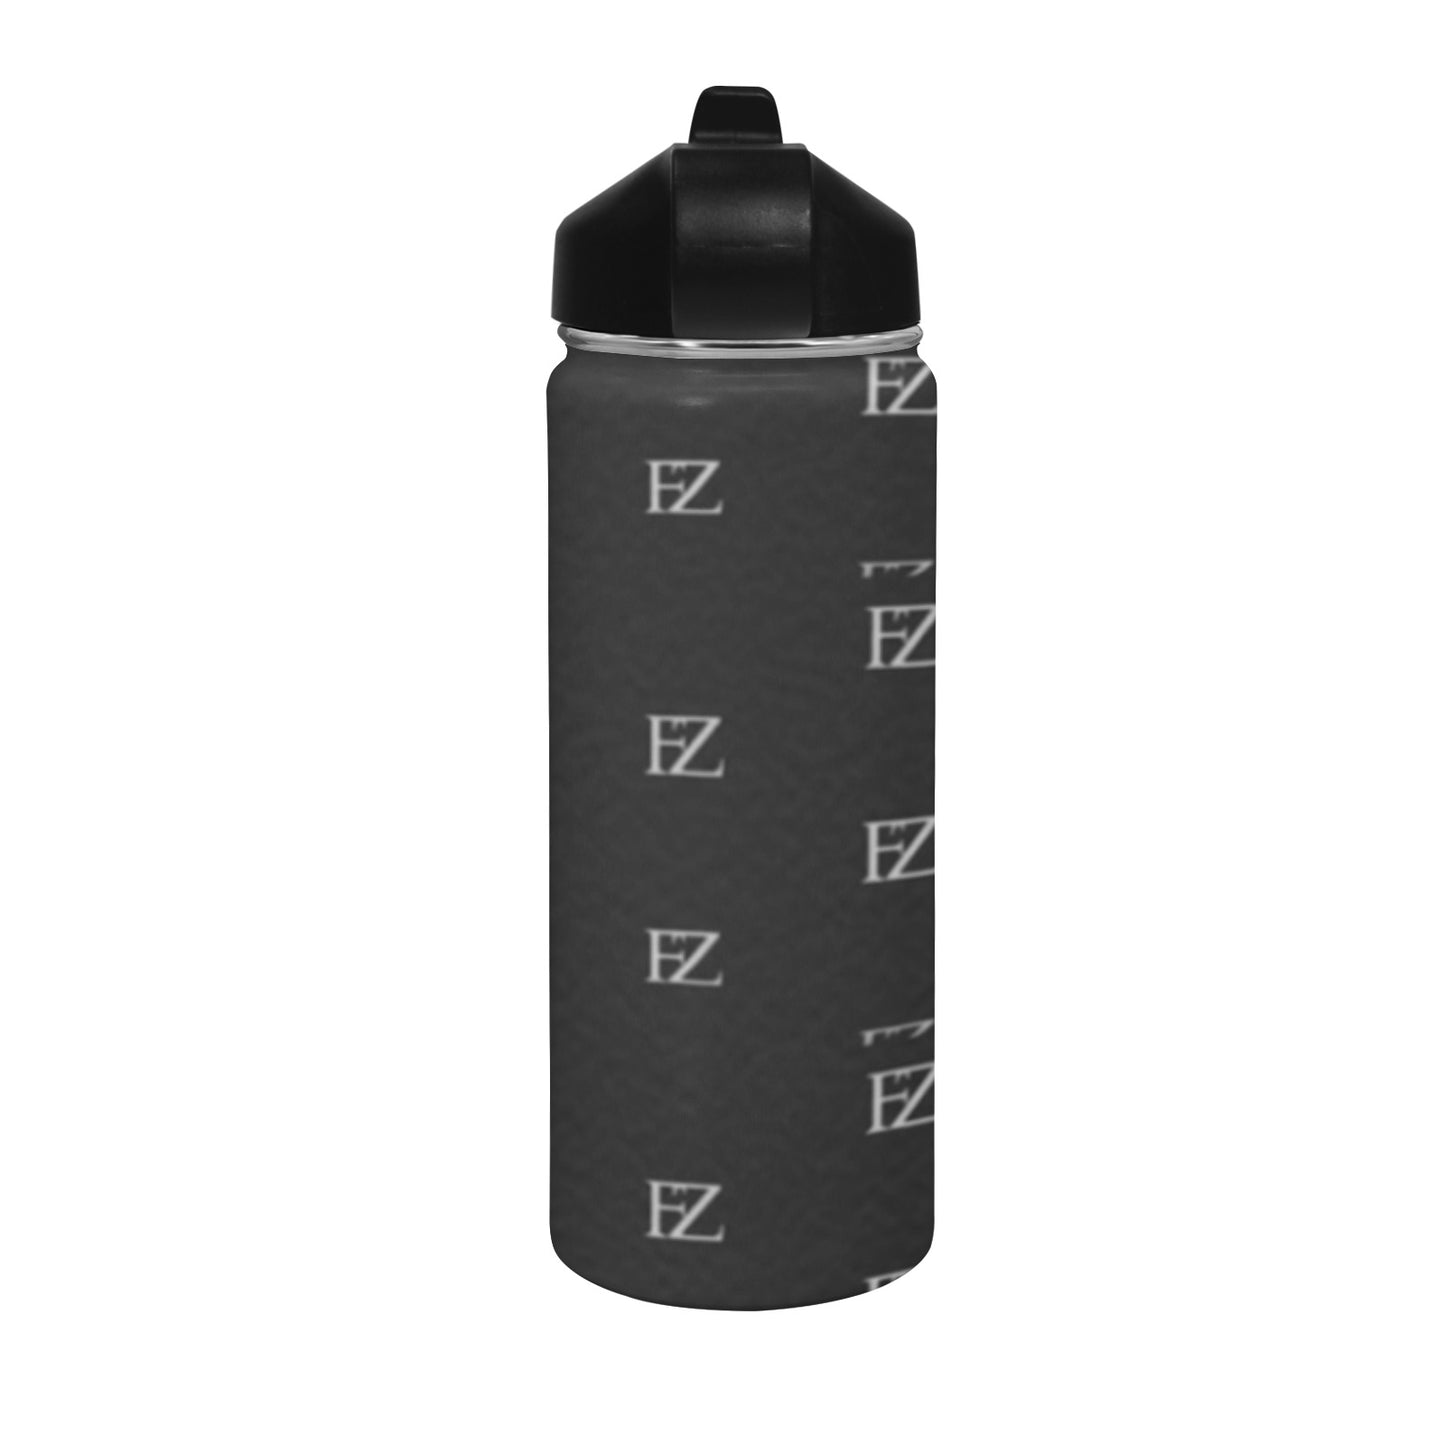 FZ Original Insulated With Straw Lid water bottle